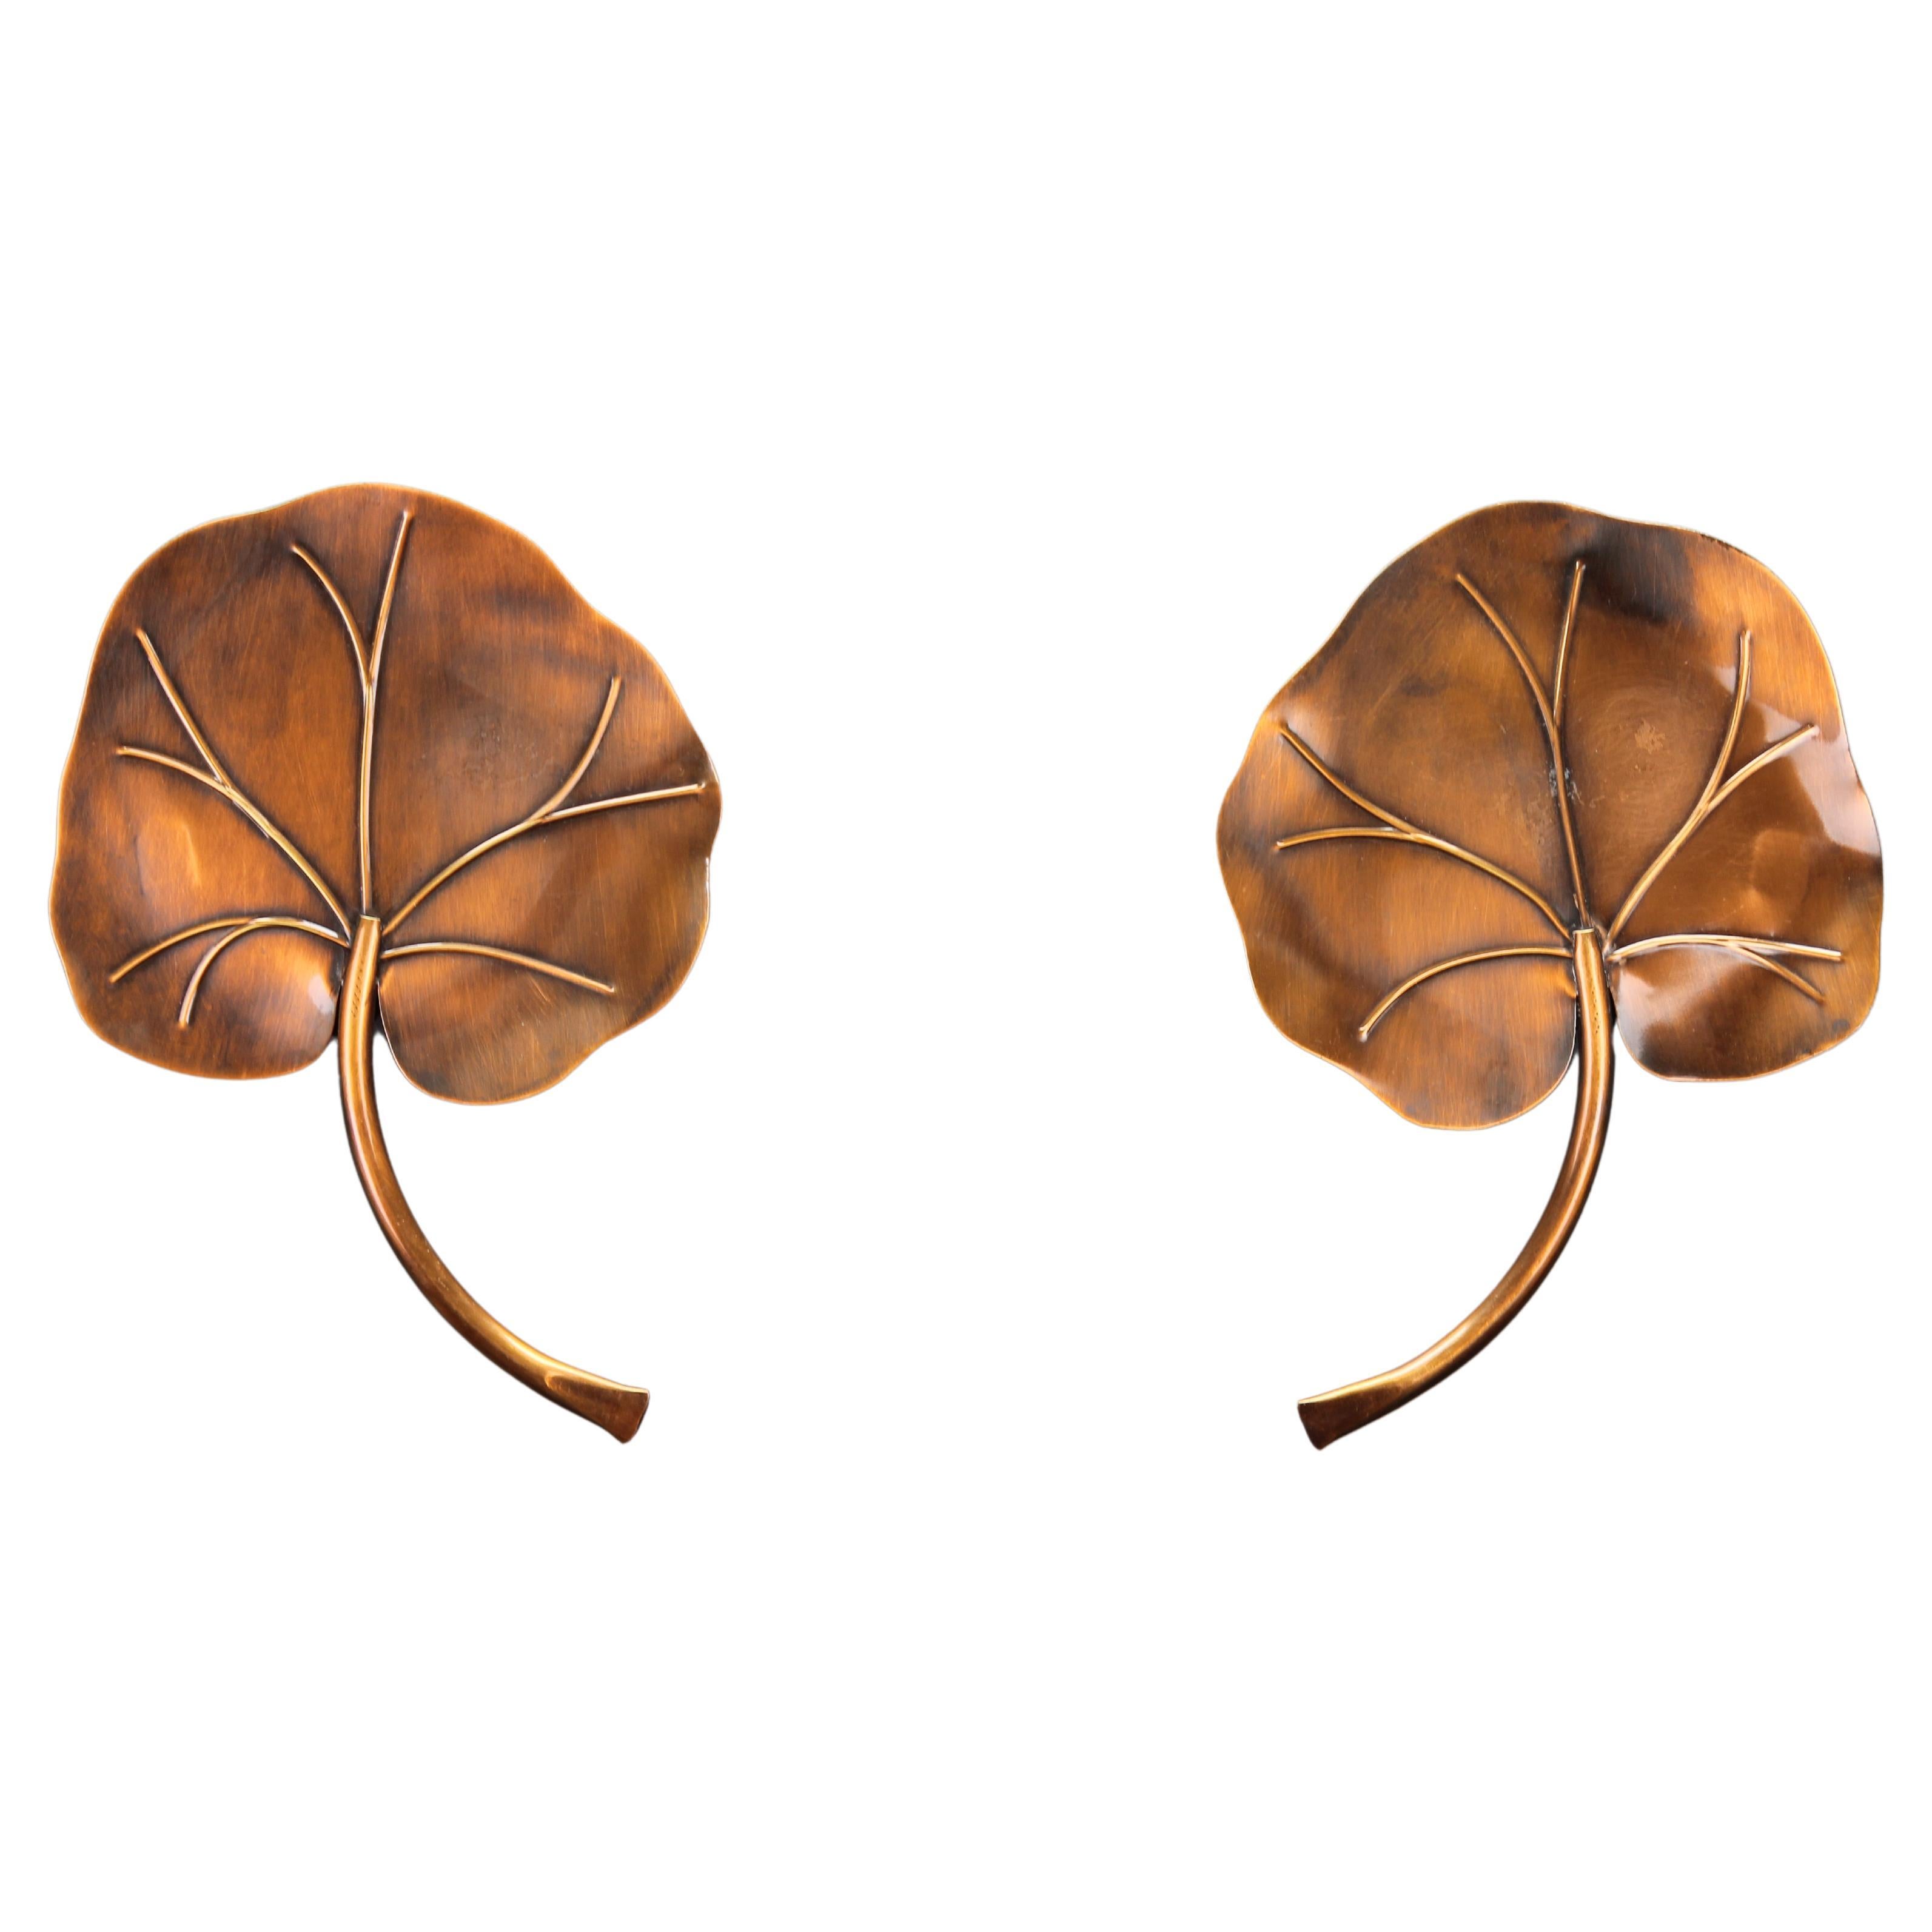 Pair of French Mid-Century Modern Brass Water Lily Leaf-Shaped Sconces